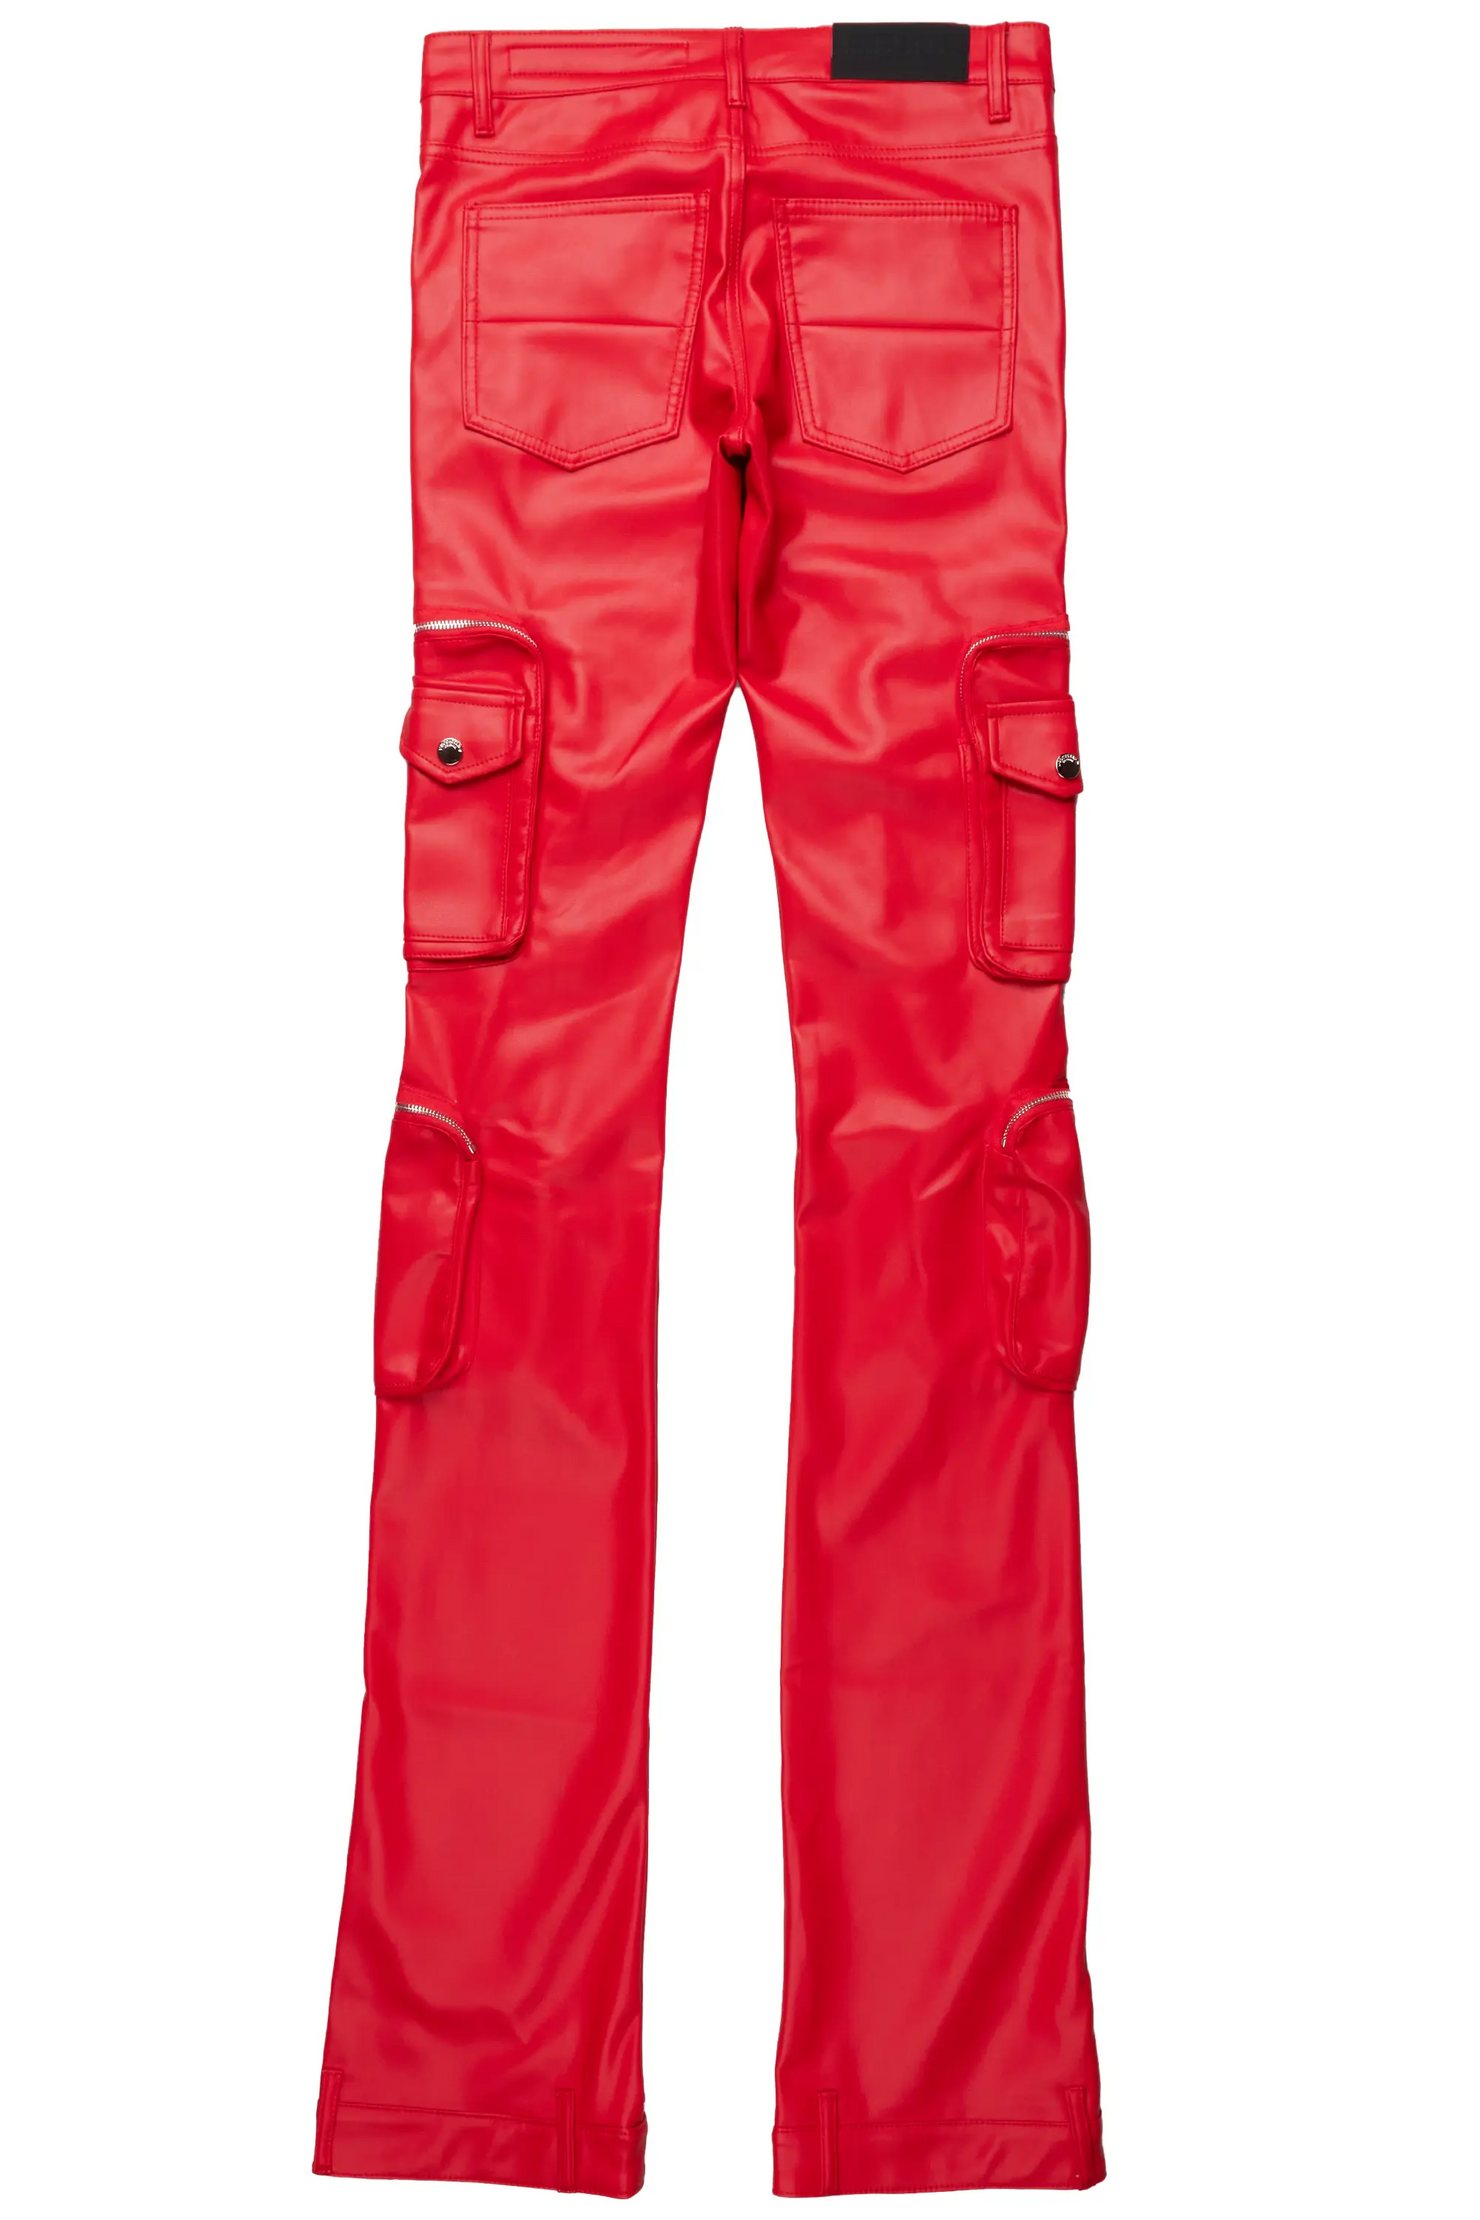 Sutton Red Faux Leather Super Stacked Jean